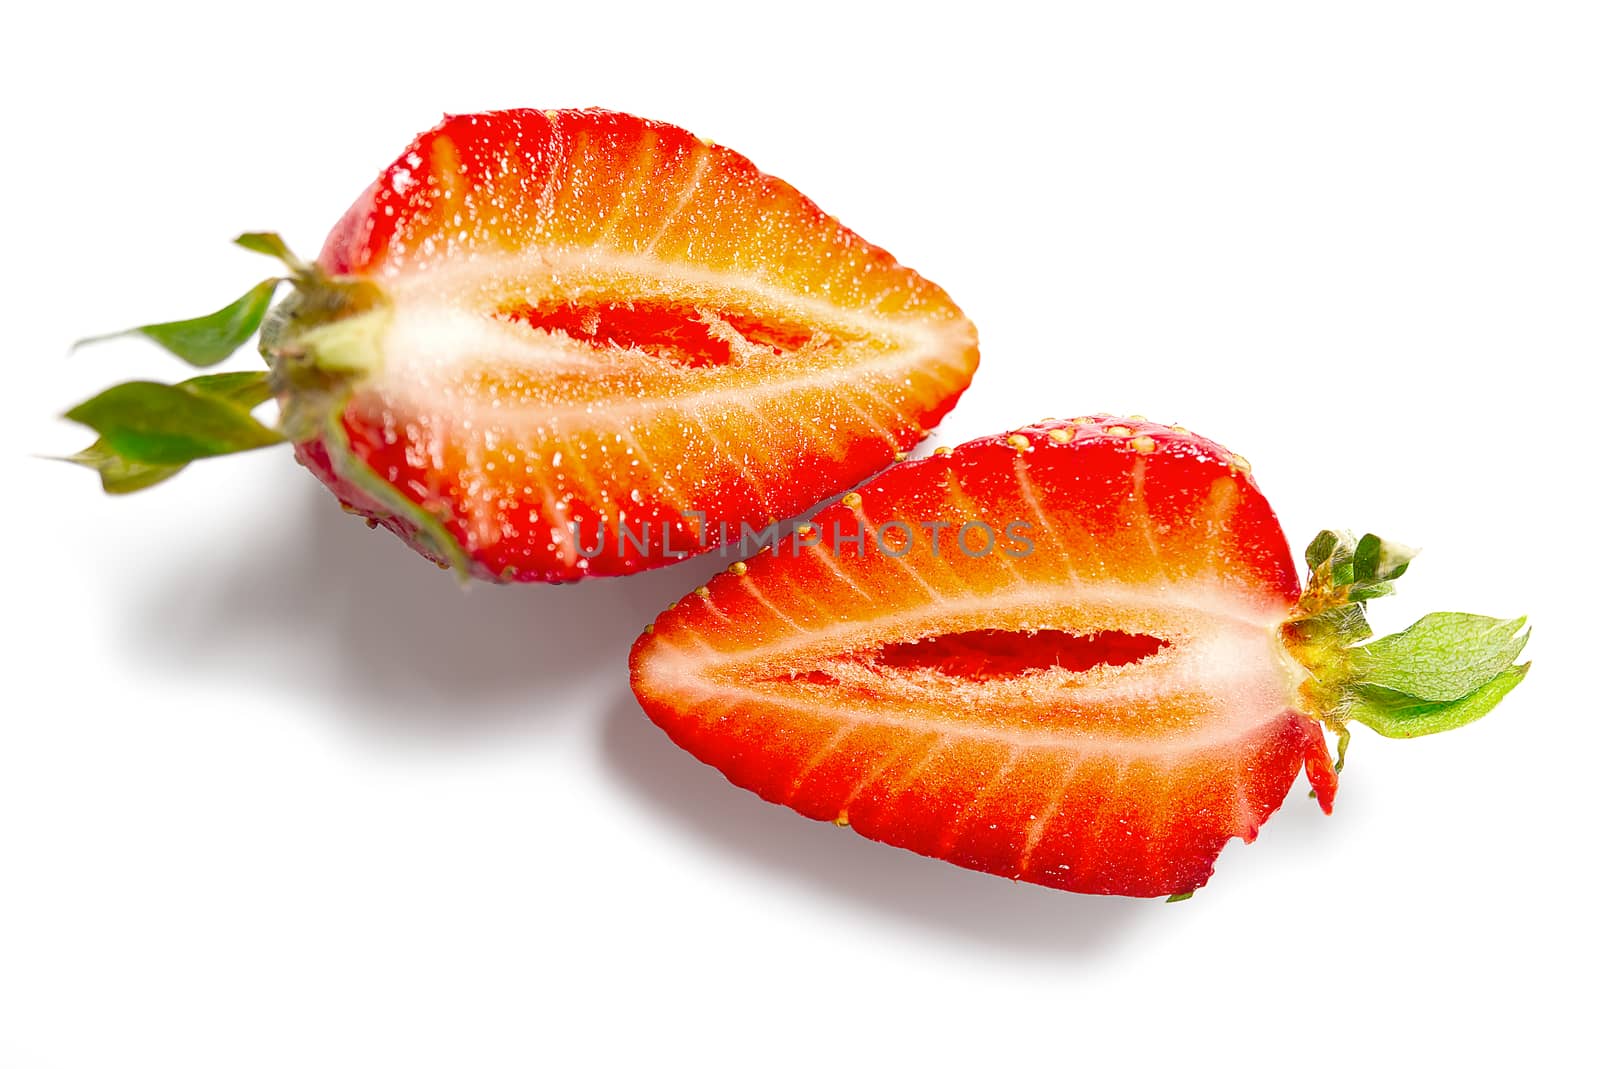 Fresh halved strawberry isolated on white background with clipping path by PhotoTime